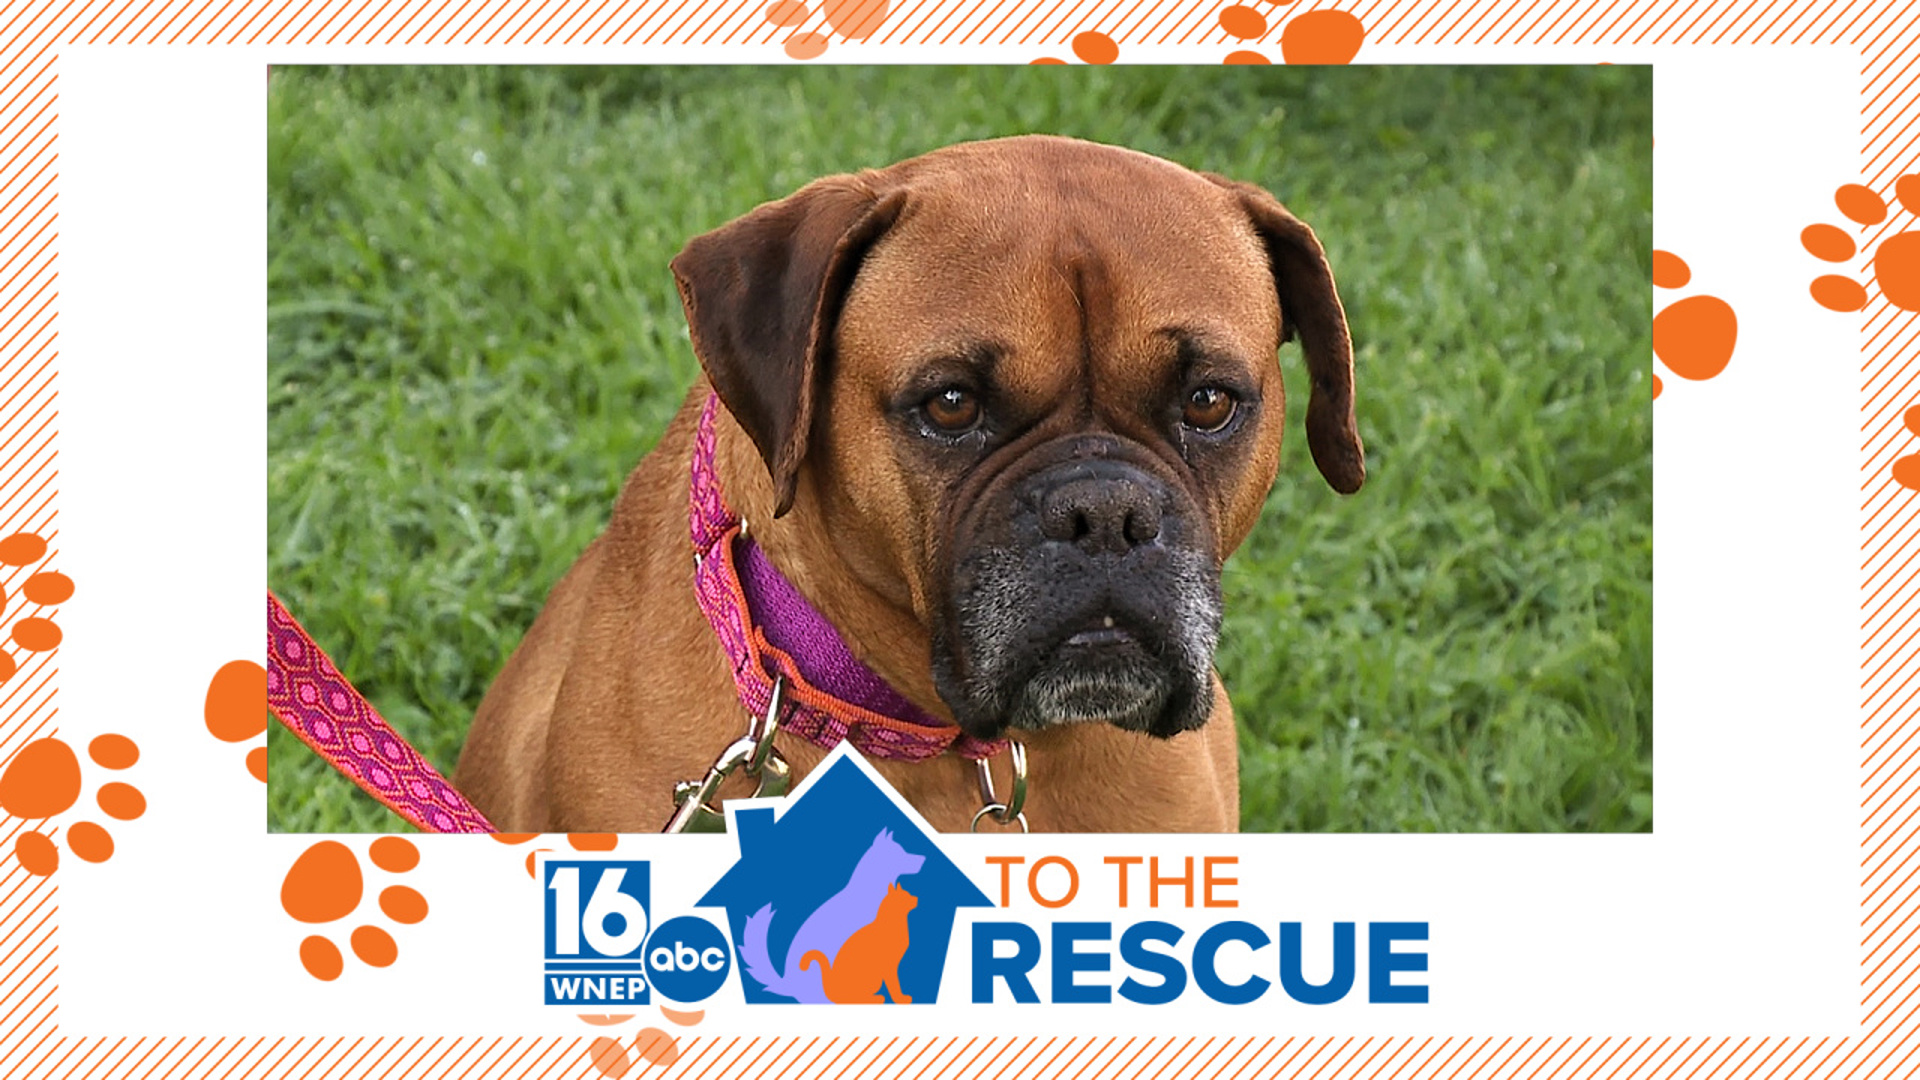 In this week's 16 To The Rescue, we meet a boxer who is learning how to play with toys and walk on a leash for the first time in her life.